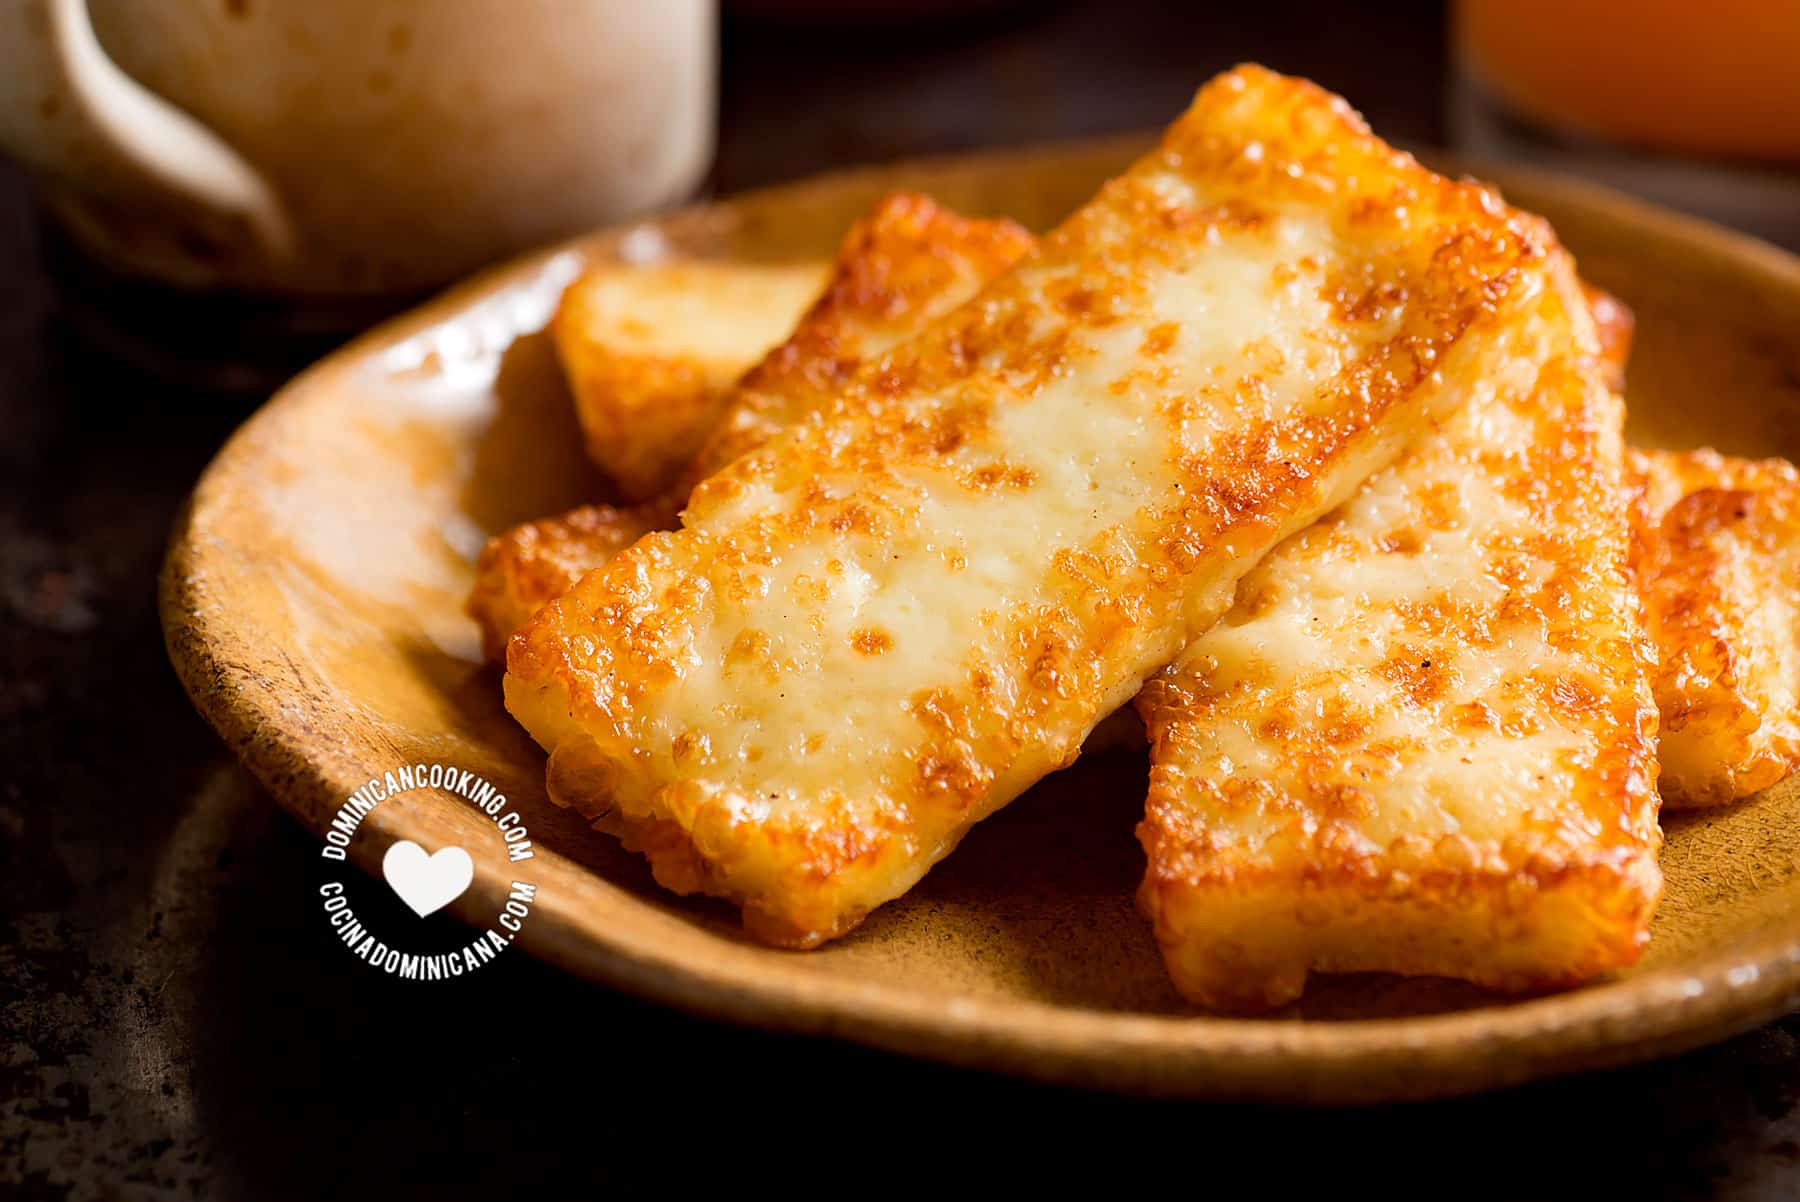 Fried cheese.